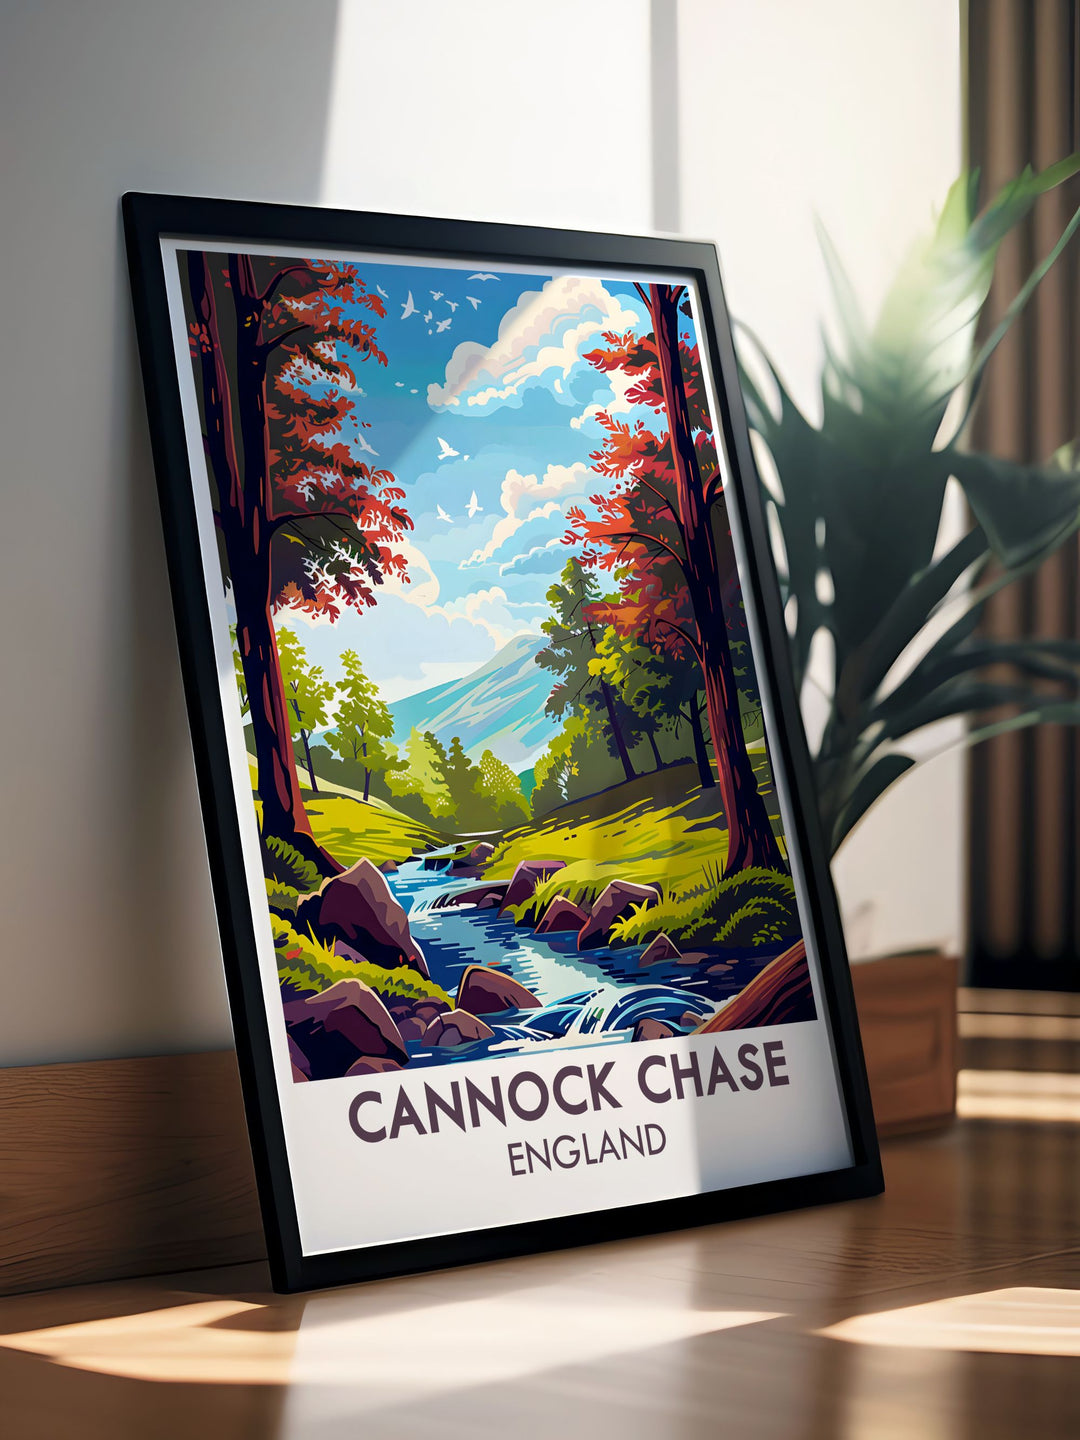 Celebrate the tranquility of Sherbrook Valley with this exquisite piece of Staffordshire art. This print highlights the serene paths and rich biodiversity of Cannock Chase making it an ideal gift for nature lovers and a charming element of English countryside decor.